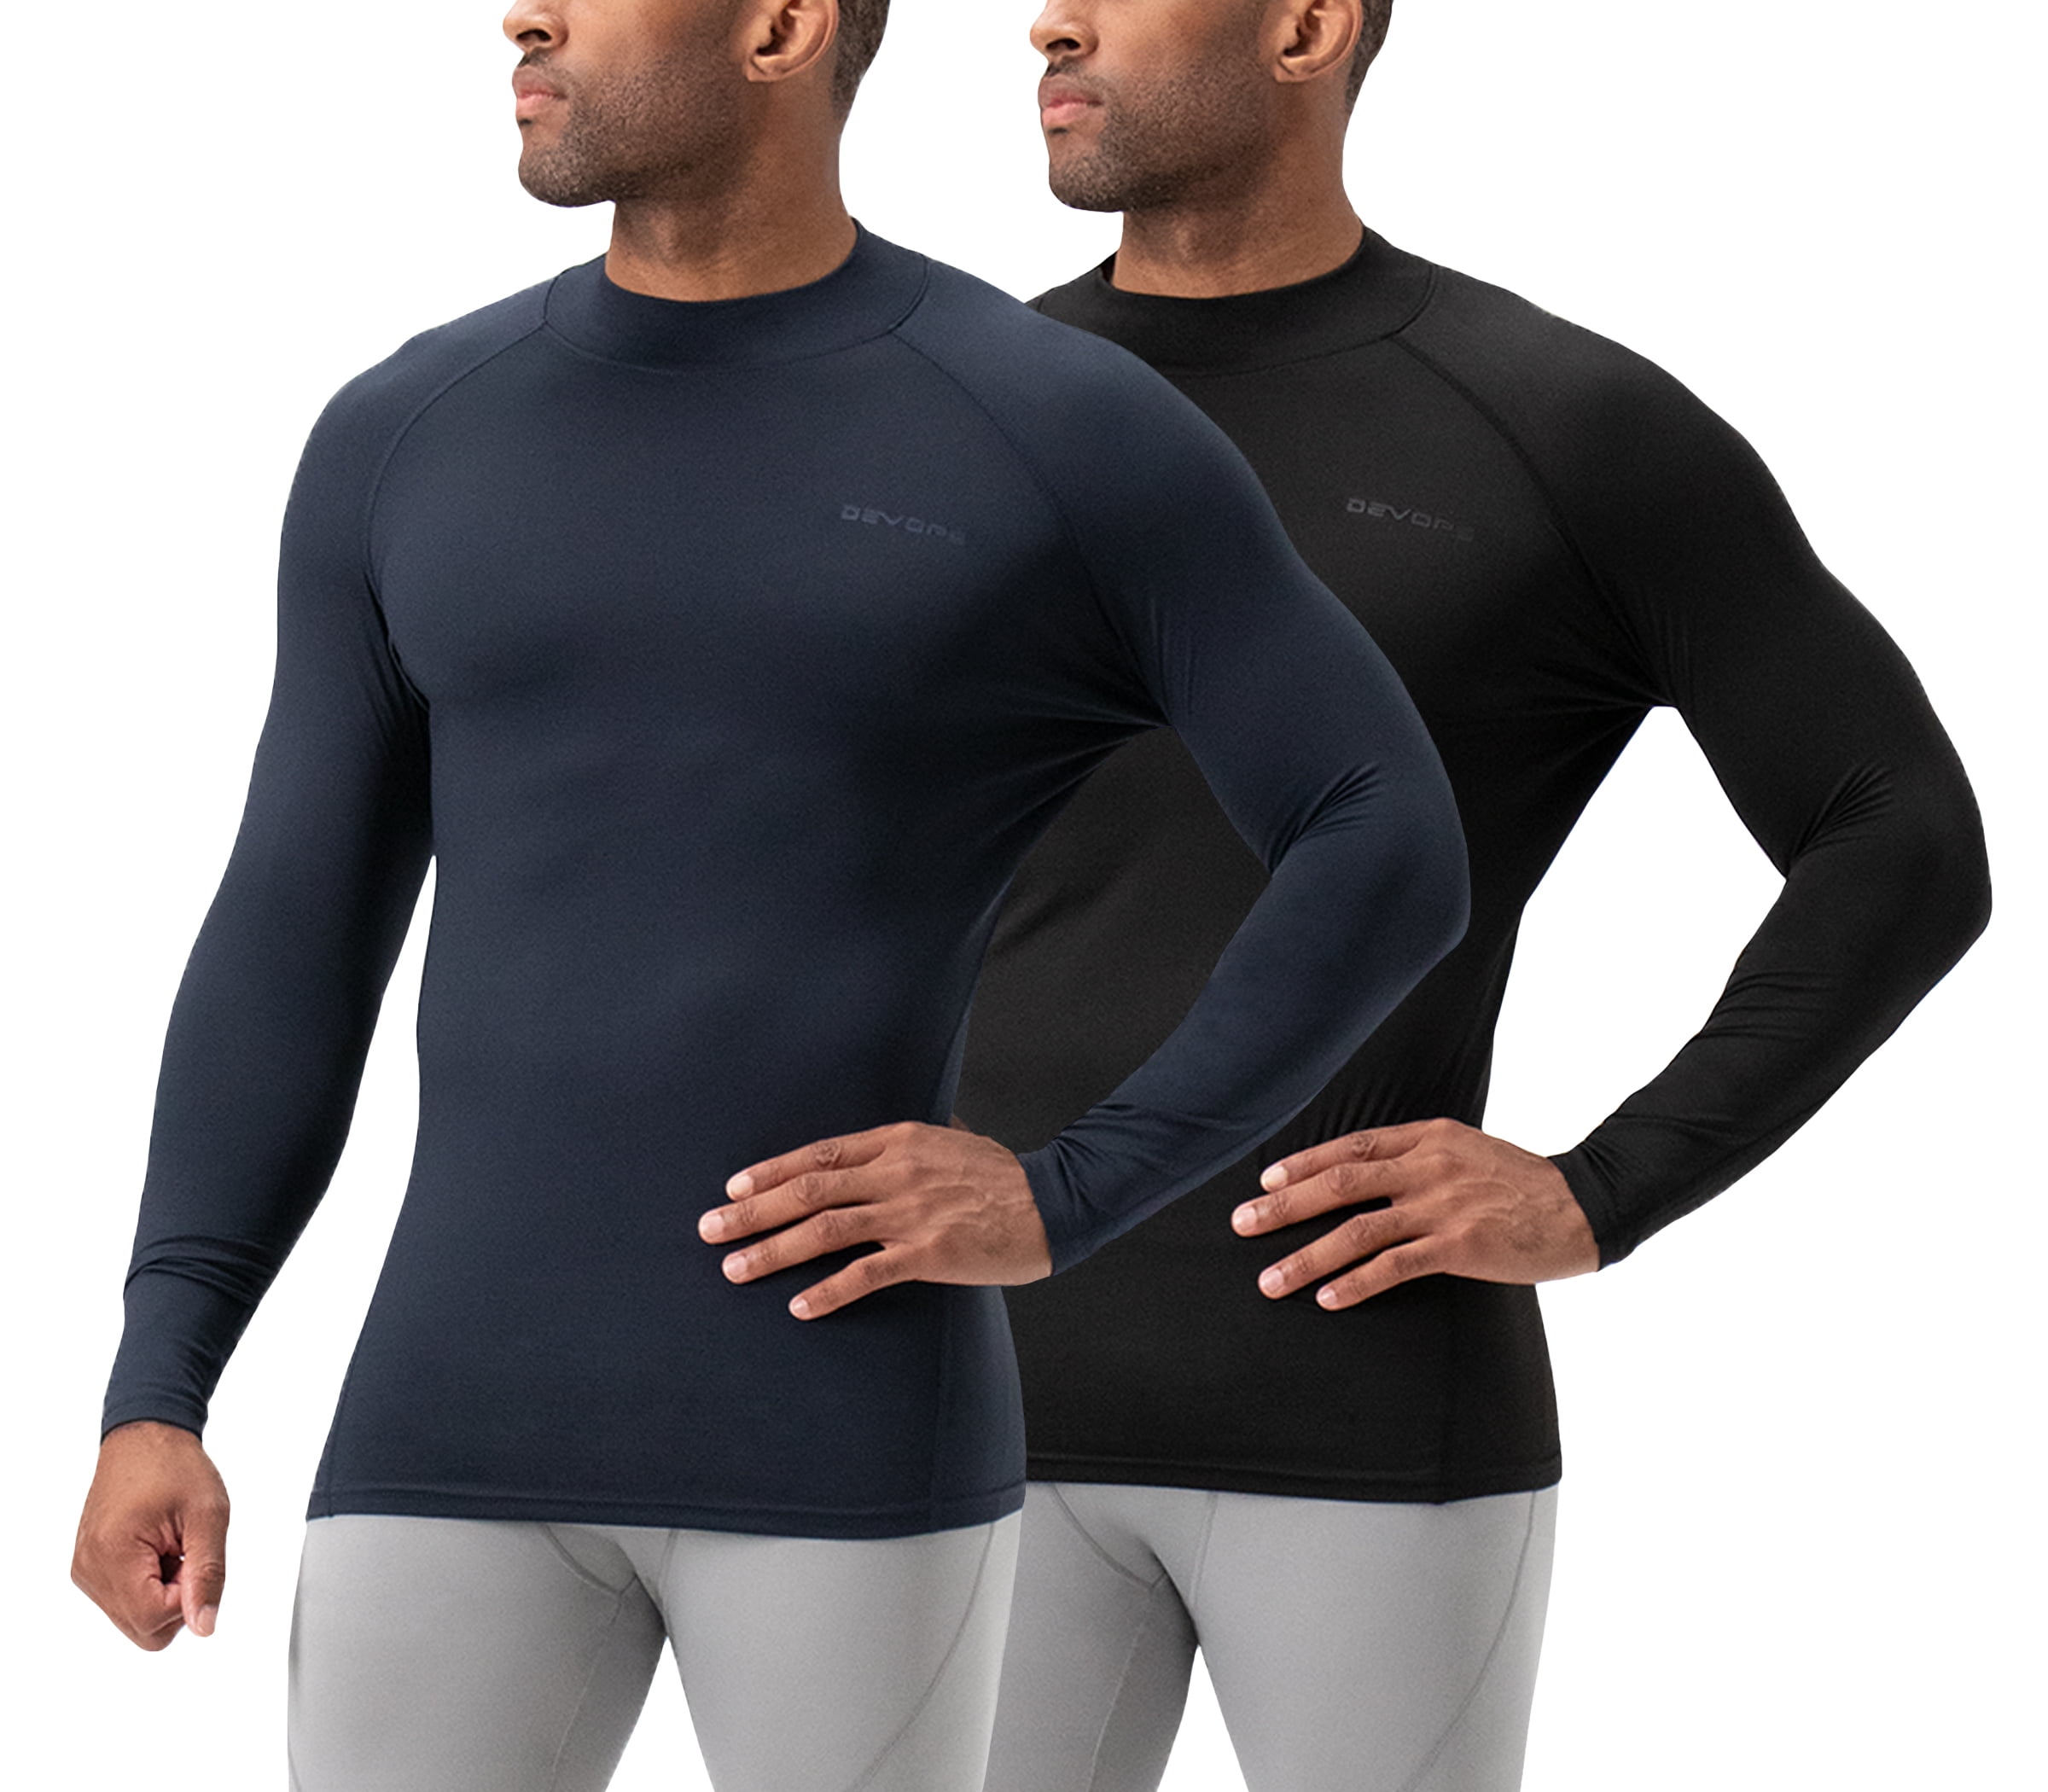 2 Pack Men Thermal Underwear Top Crew Neck Male Long Johns Shirts Size 2XL  